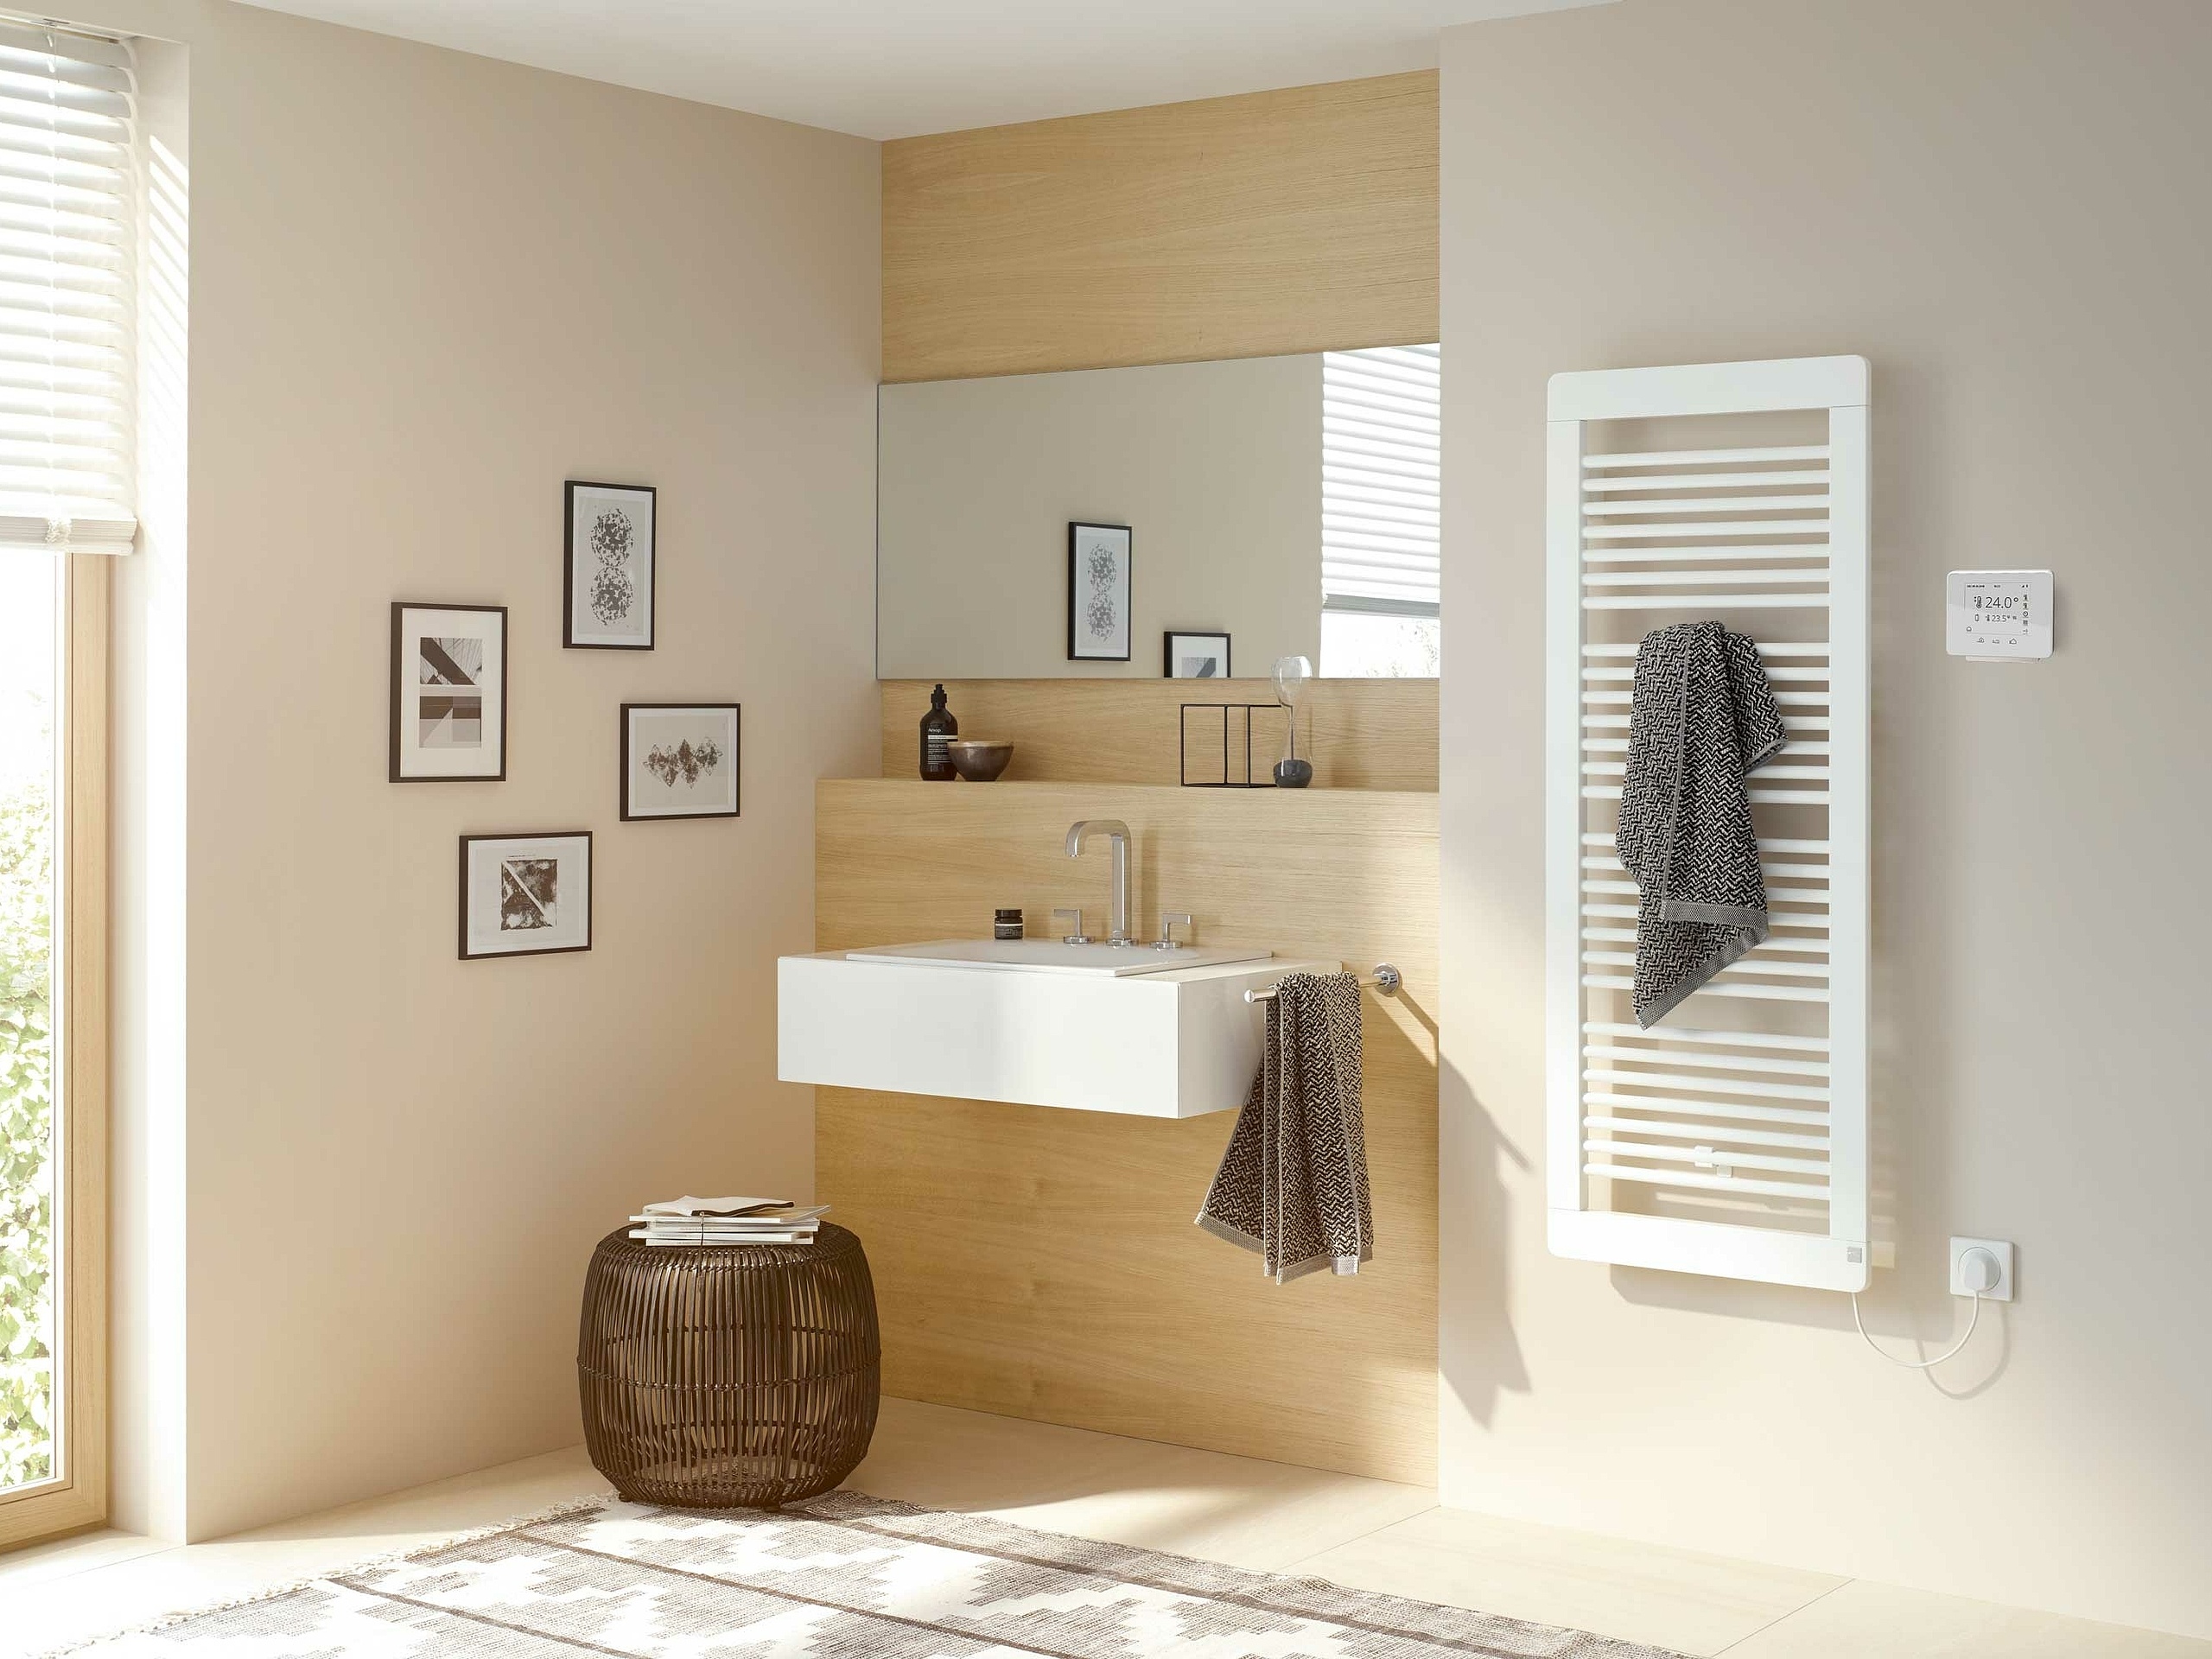 The Kermi Credo plus designer and bathroom radiator is also available in an electric version.